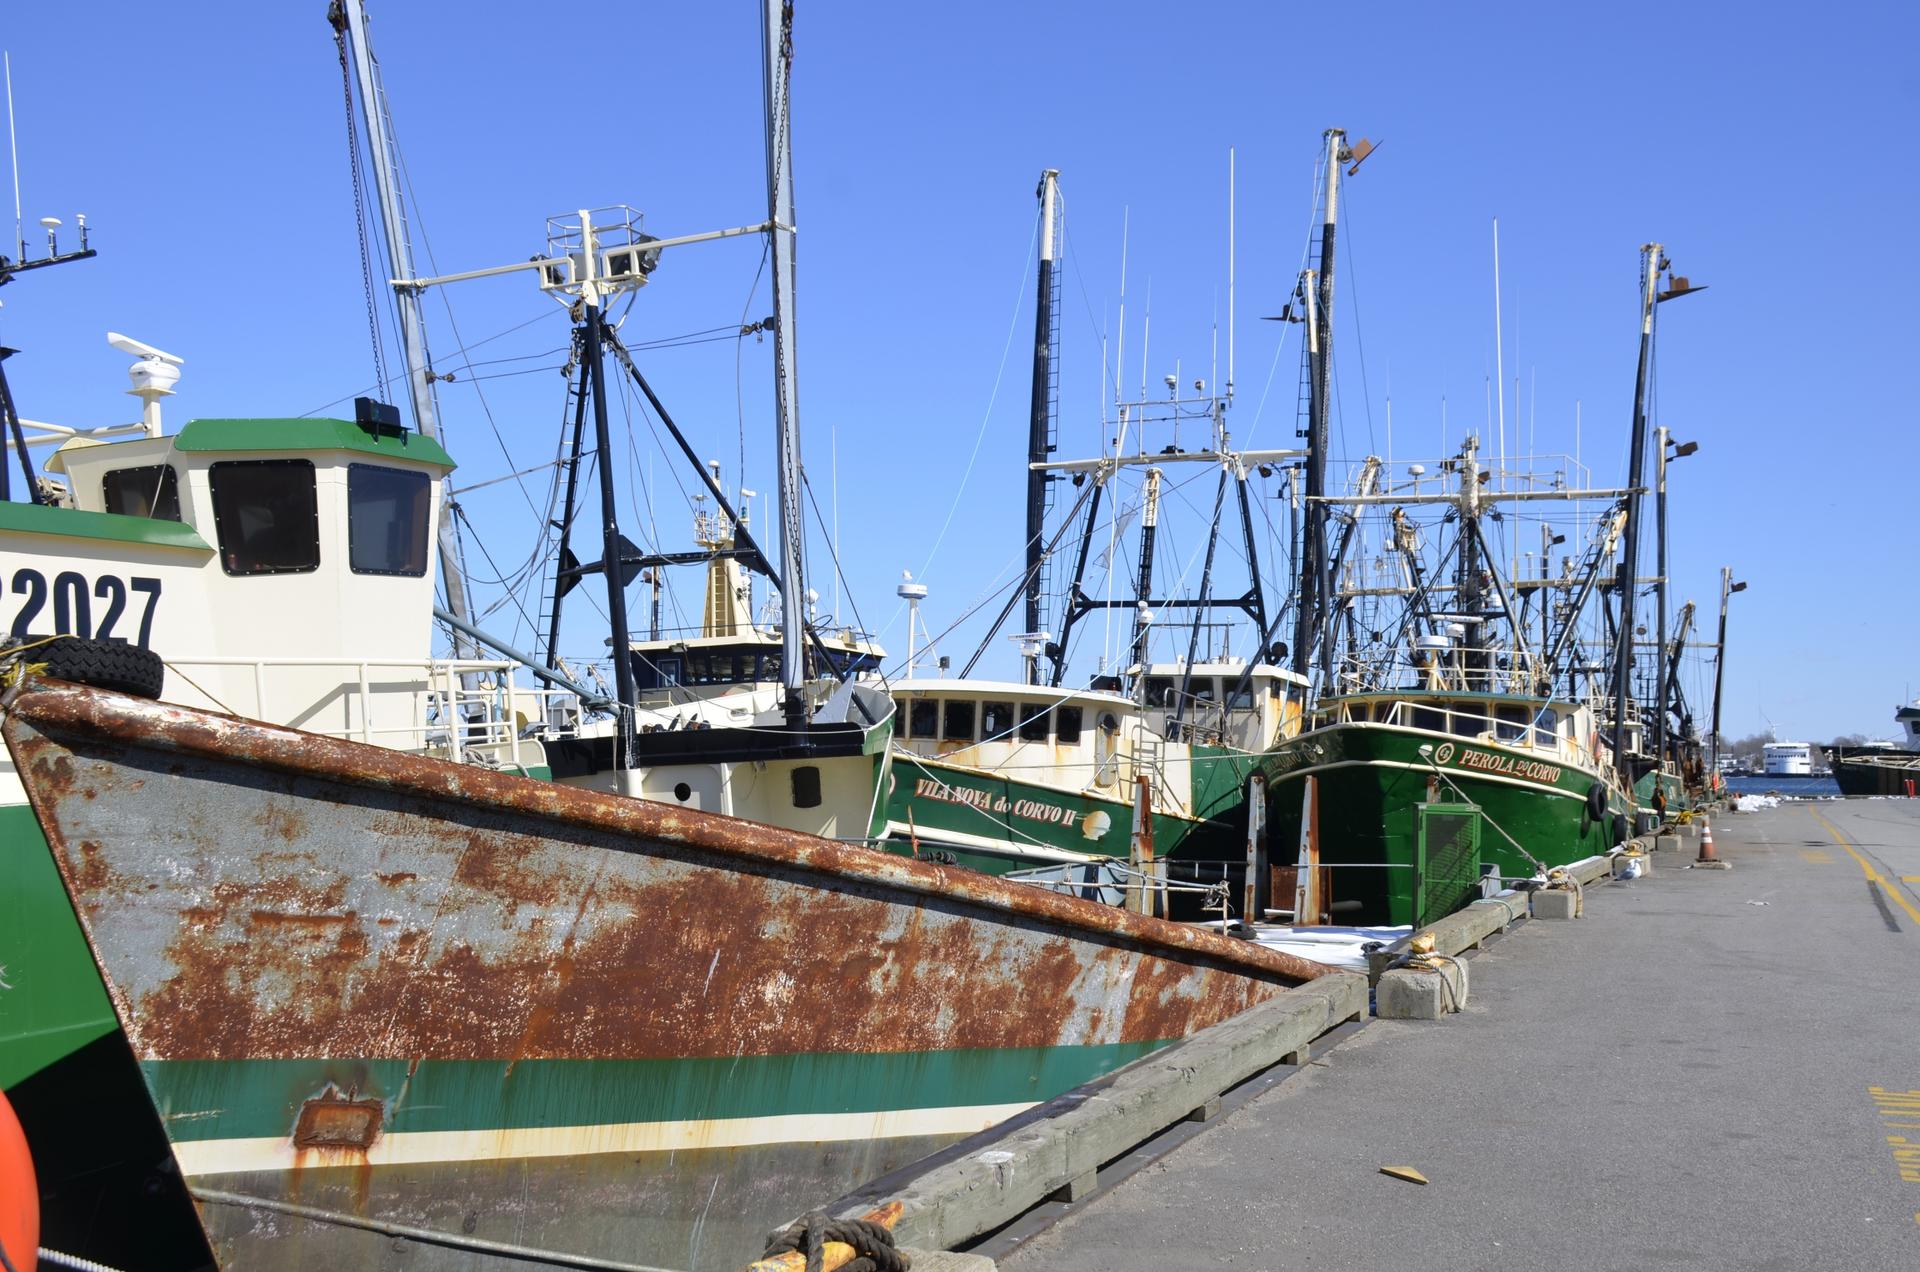 New Bedford, Massachusetts has held the title as the nation’s most valuable commercial fishing port for nearly two decades. 